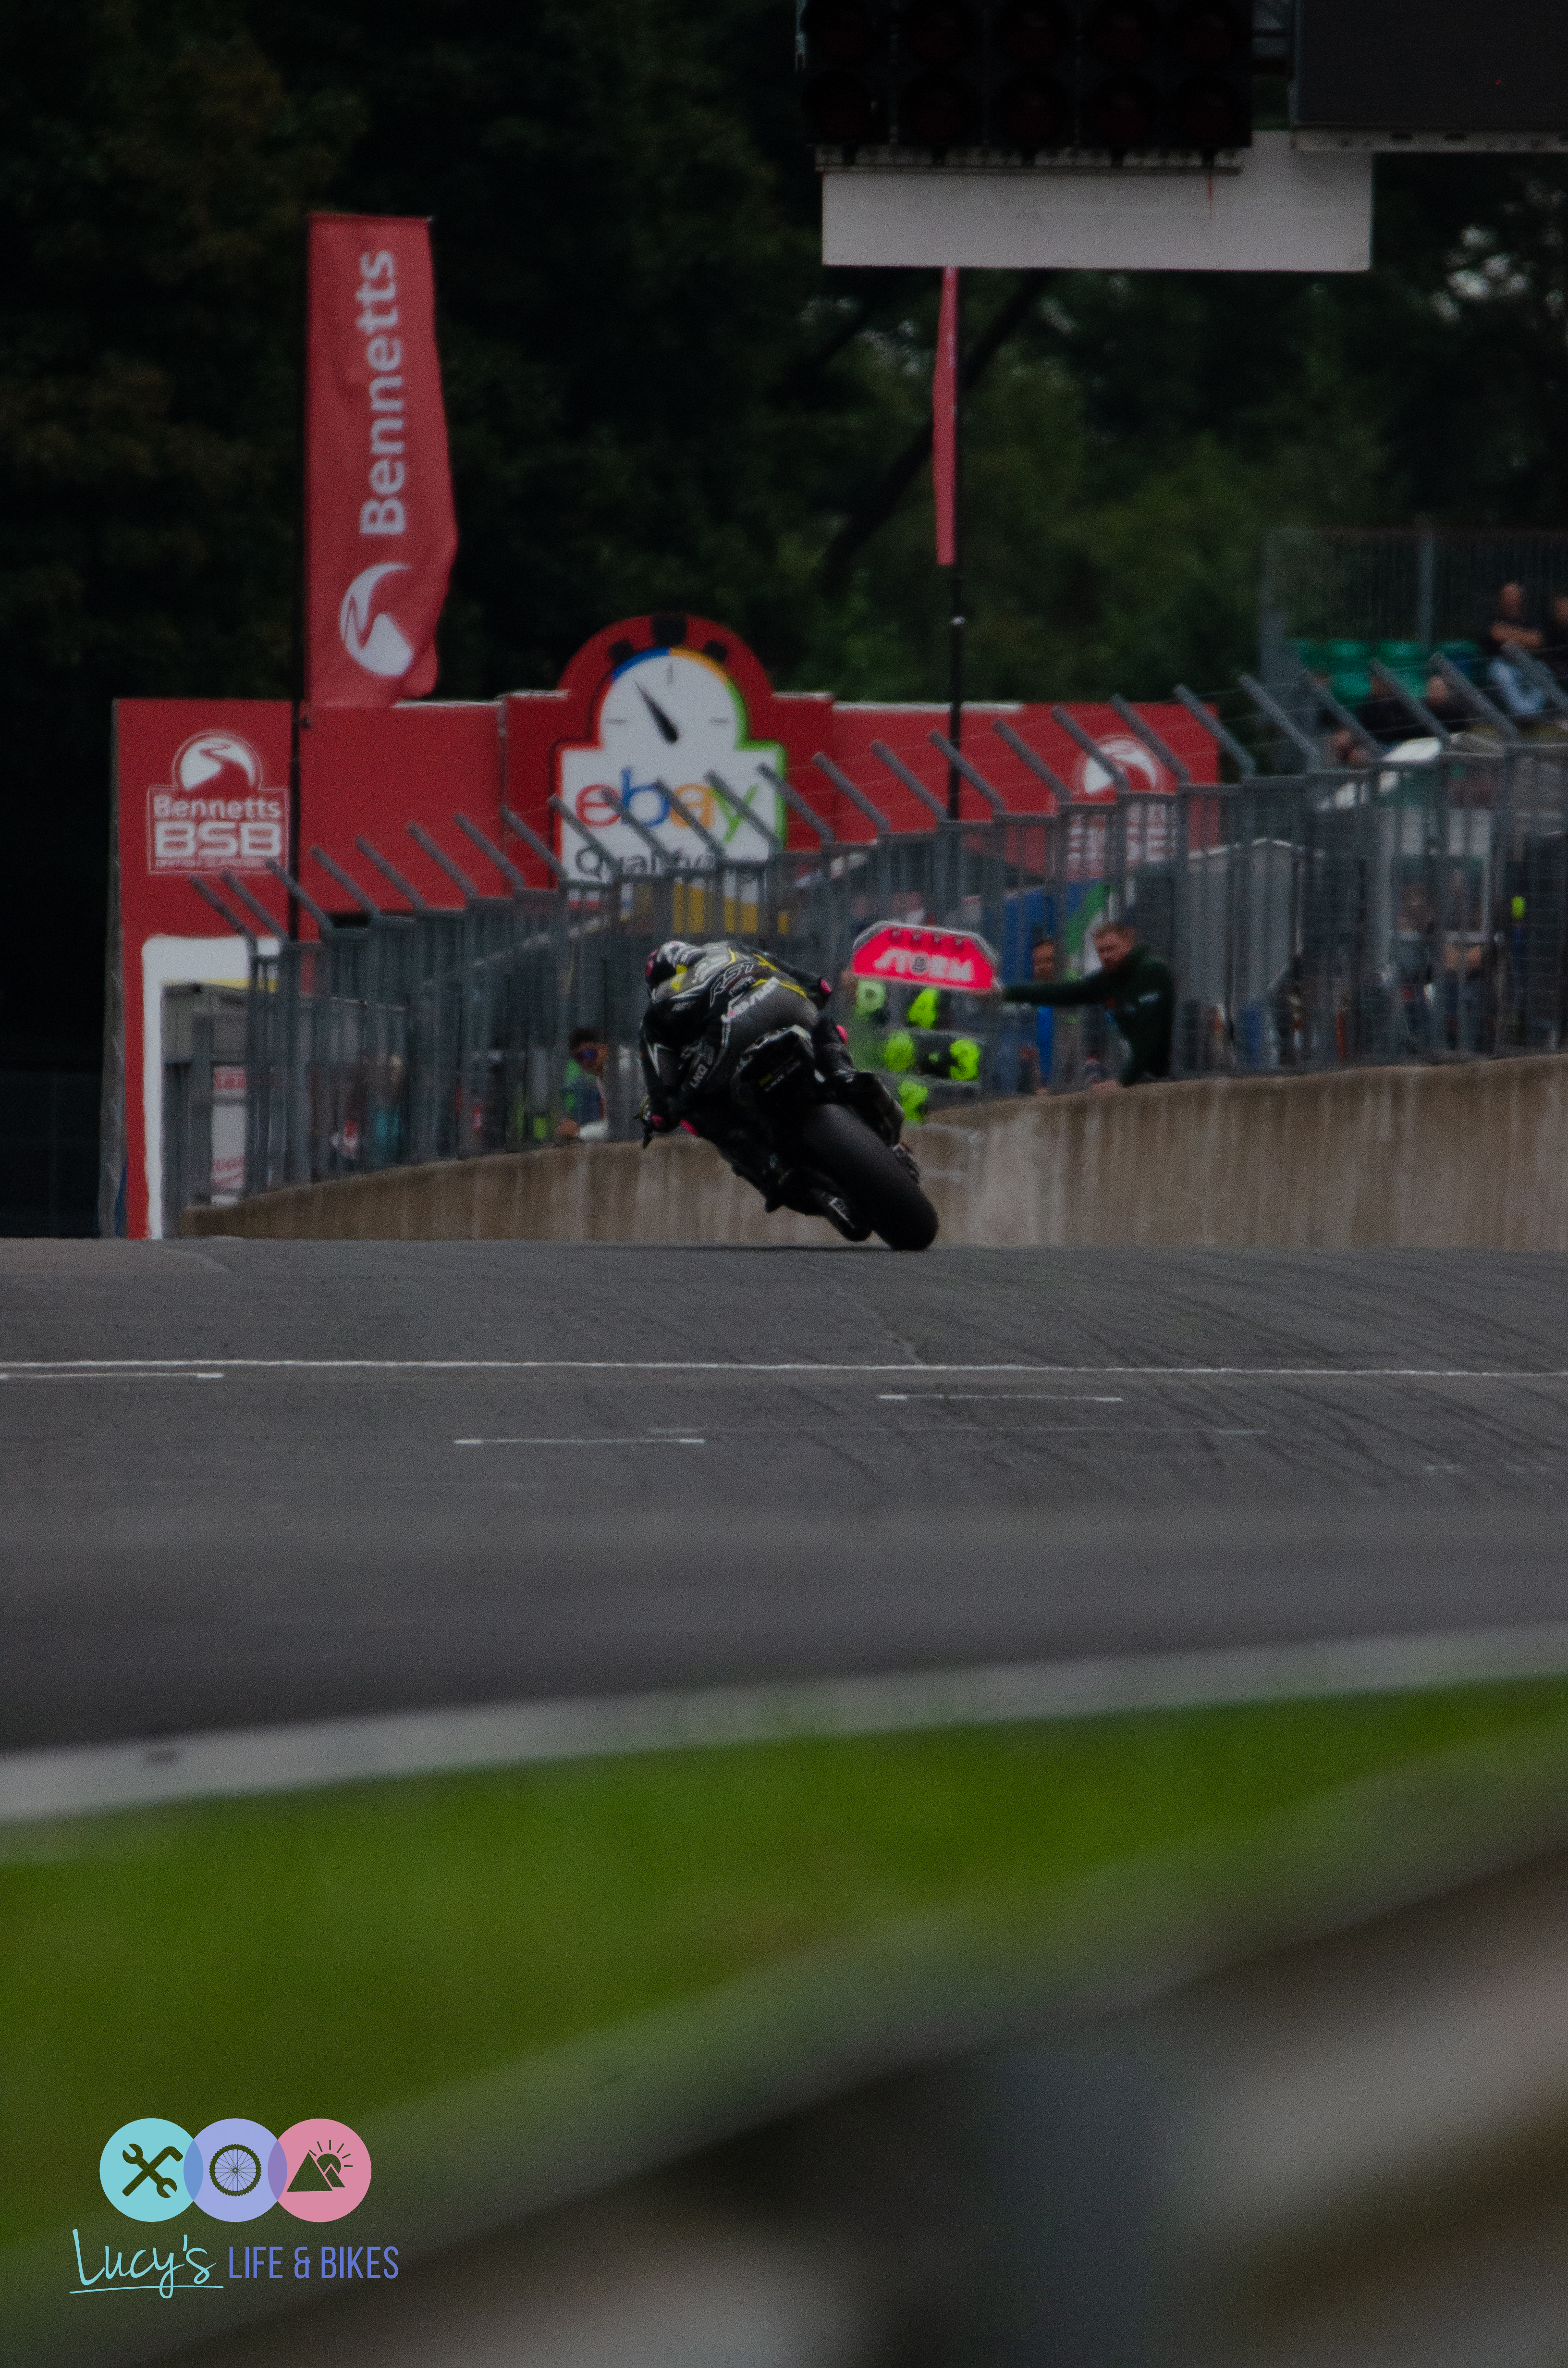 Storm Stacey at the Bennet's British Superbikes Round 9 at Oulton Park